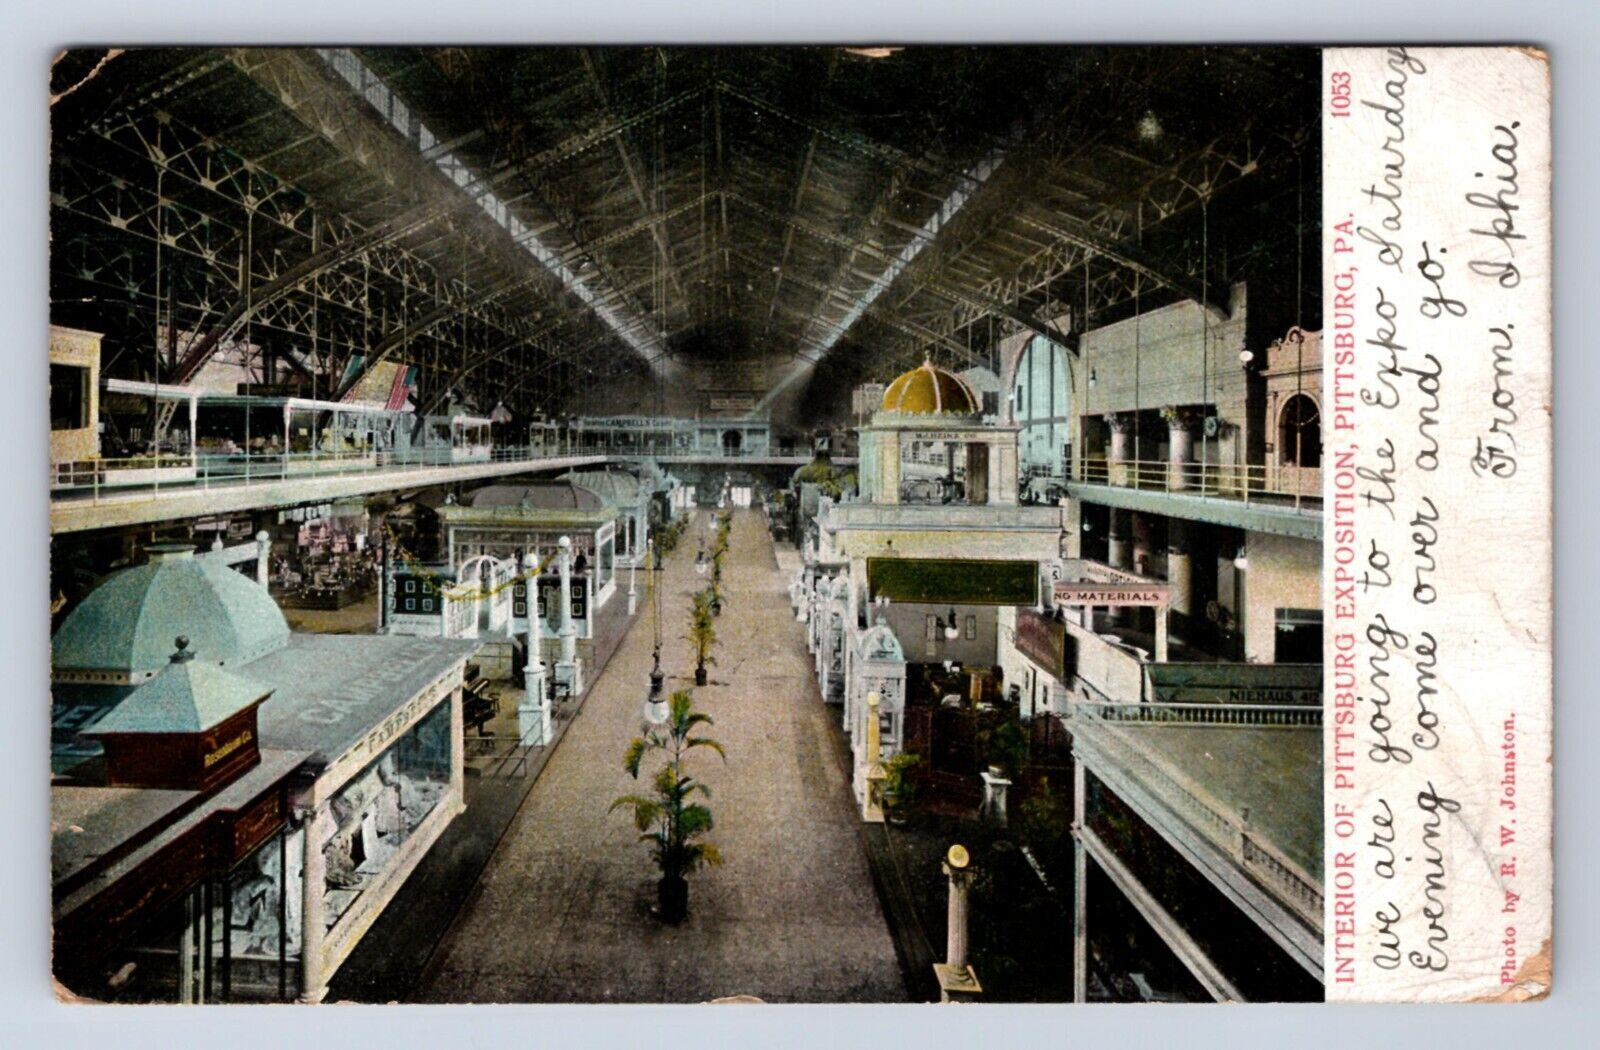 VINTAGE INTERIOR OF PITTSBURG EXPOSITION PITTSBURG PA 1906 POSTCARD FE